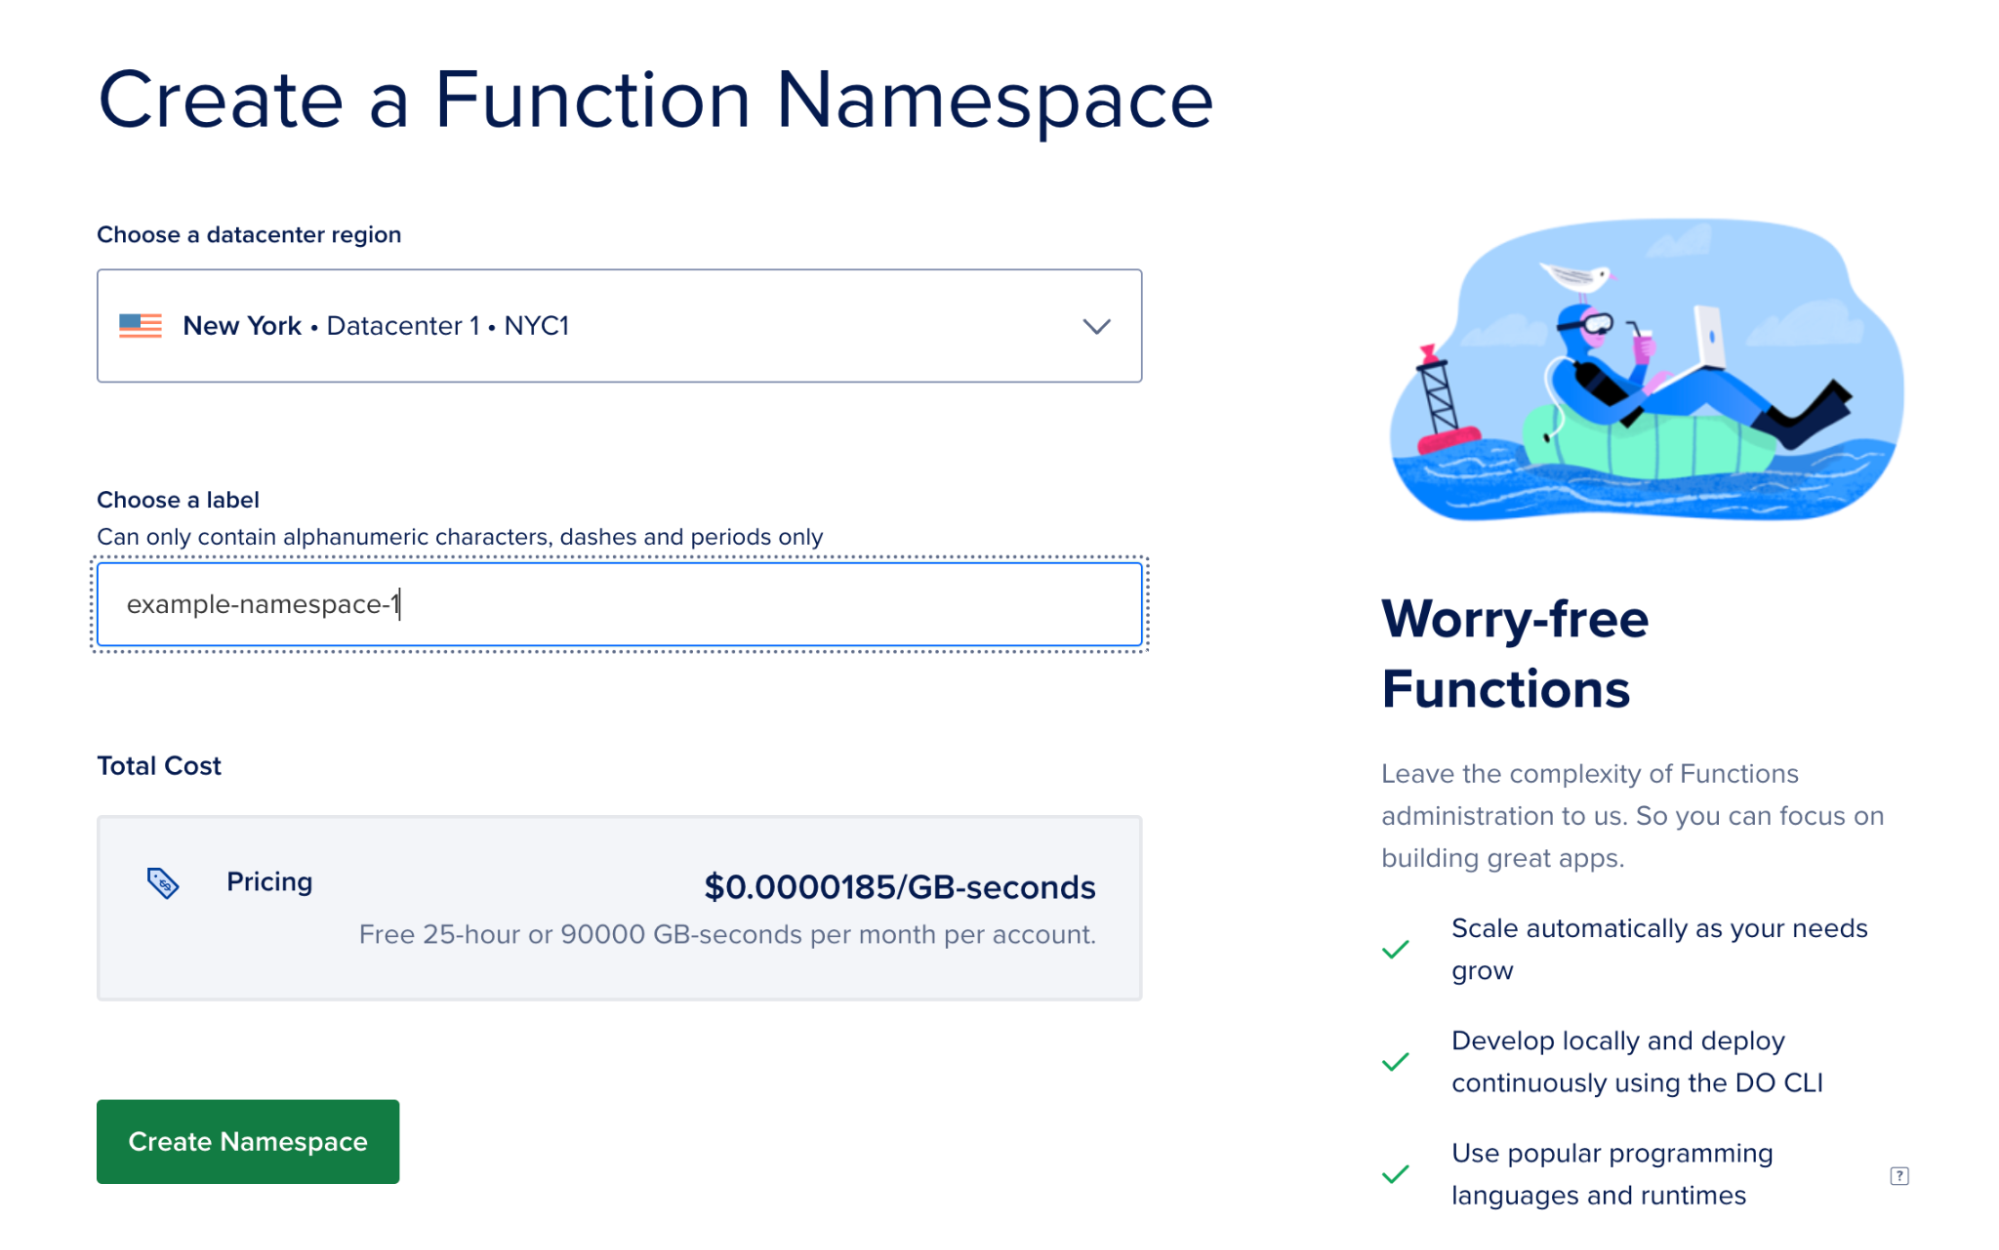 The Create a Function Namespace page, with options for datacenter region and label